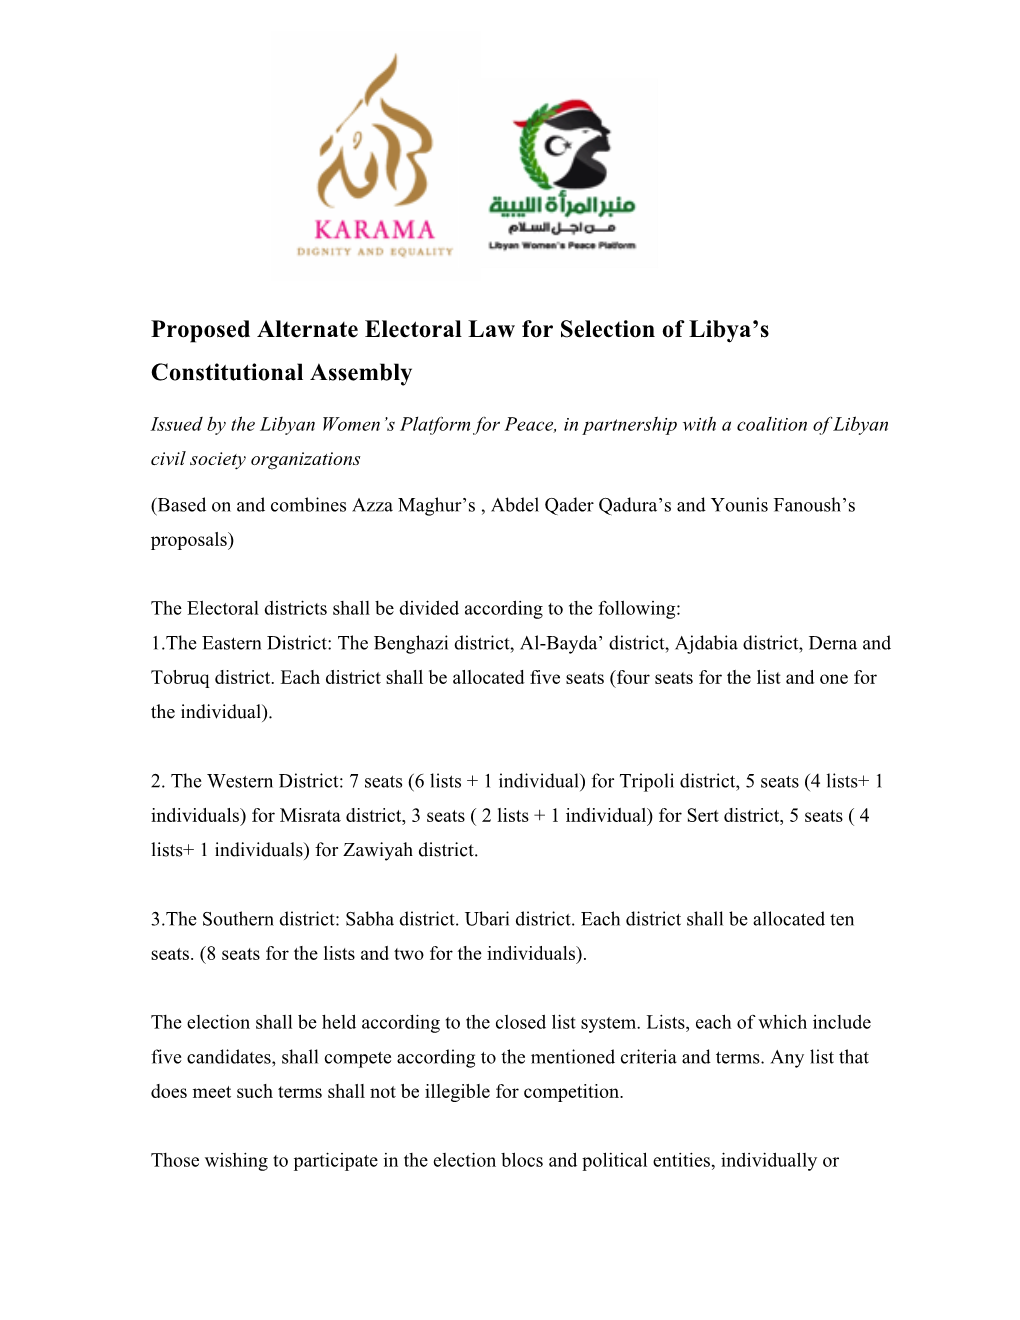 Proposed Alternate Electoral Law for Selection of Libya's Constitutional